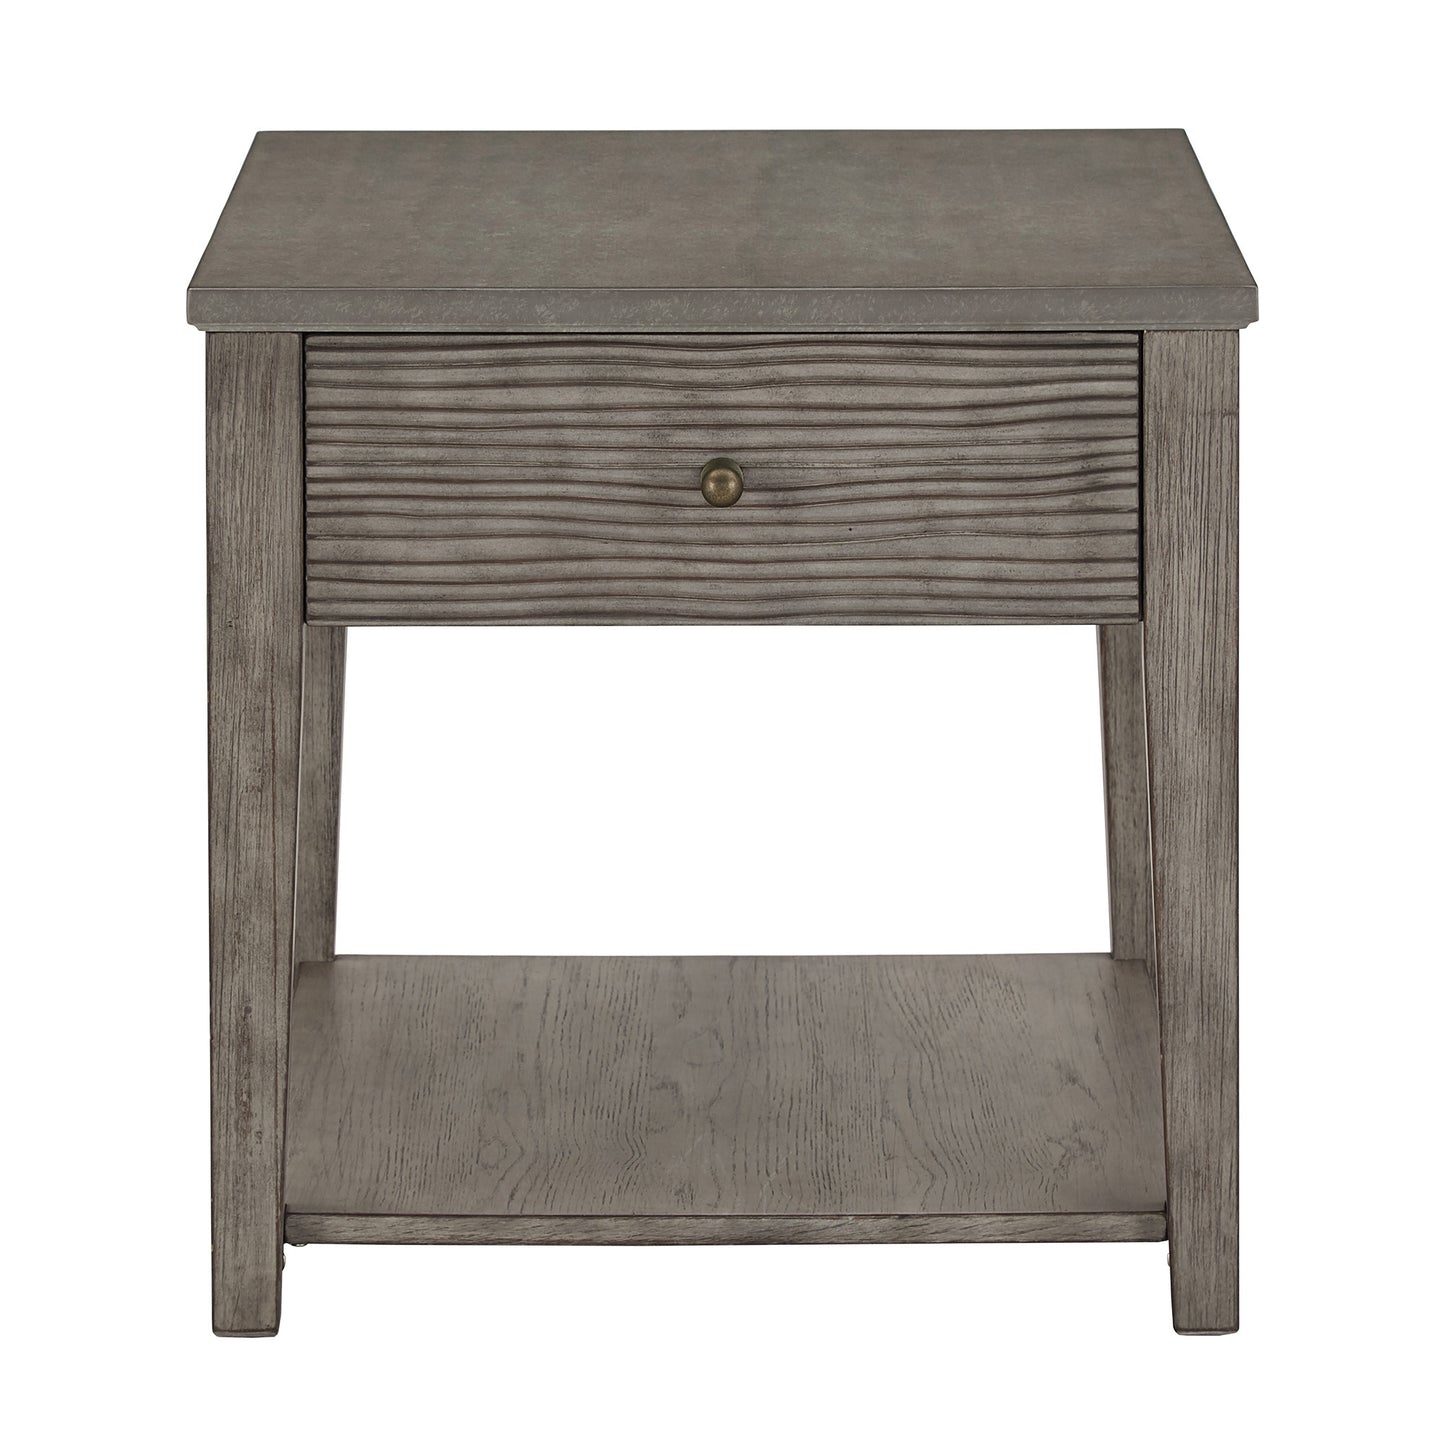 Antique Grey Finish Grey Fiber Cement Table with Self - Coffee and End Table Set